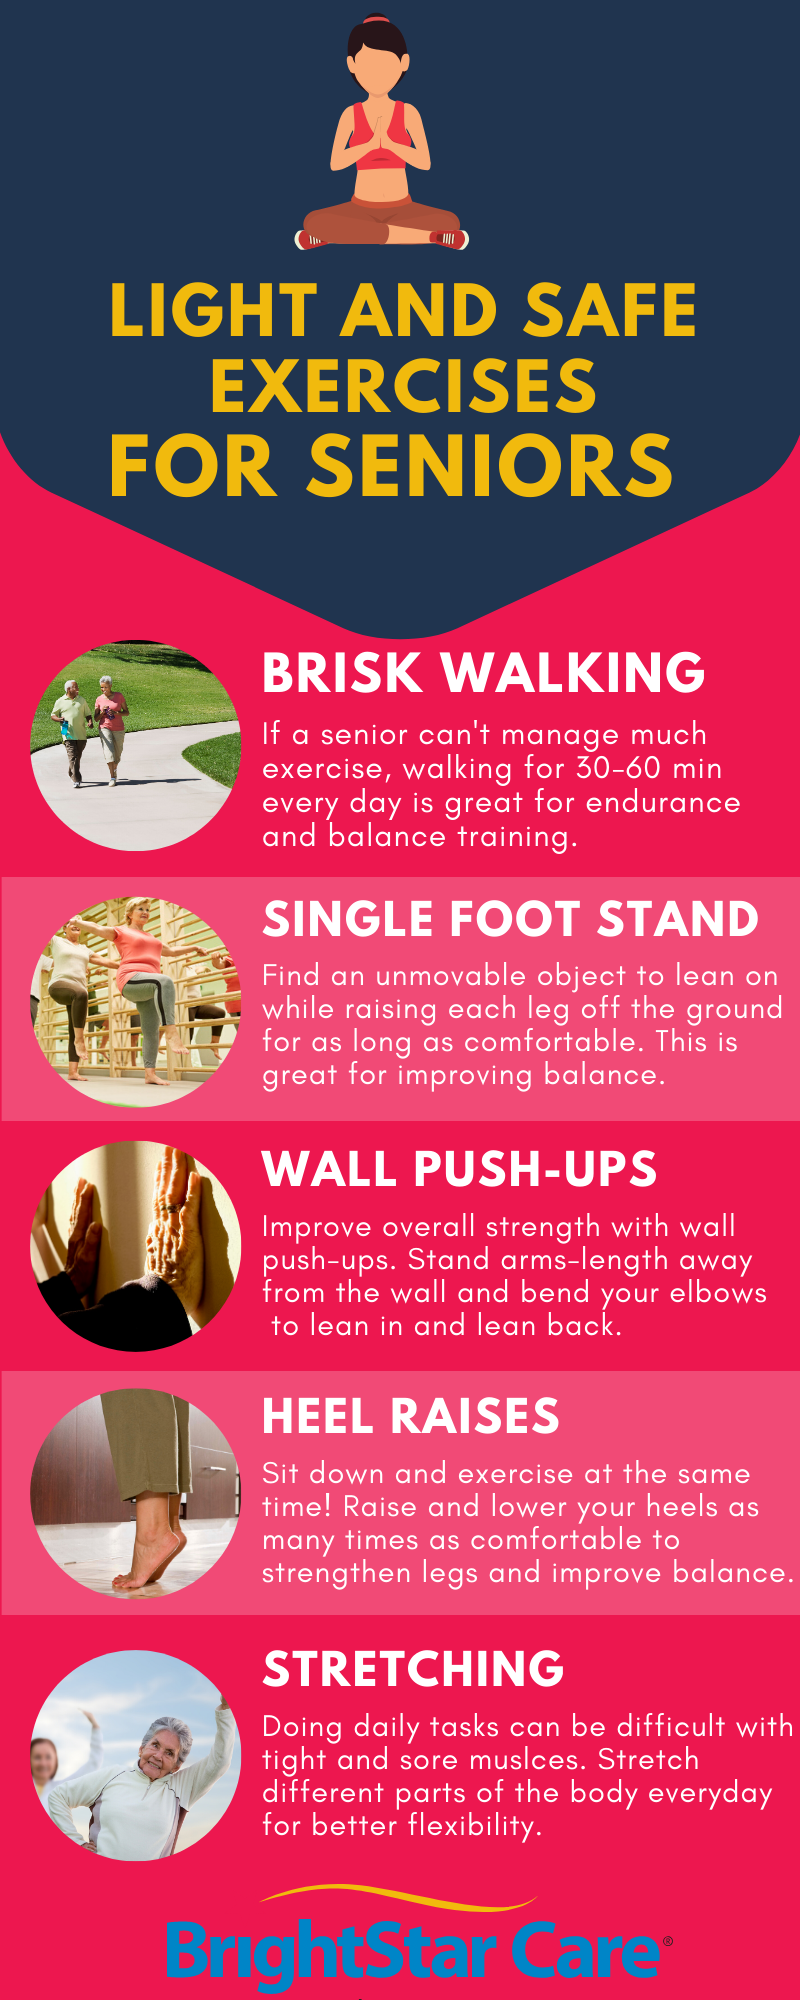 BrightStar-Care-Light-and-safe-exercise-for-seniors-Infographic-Approved.png